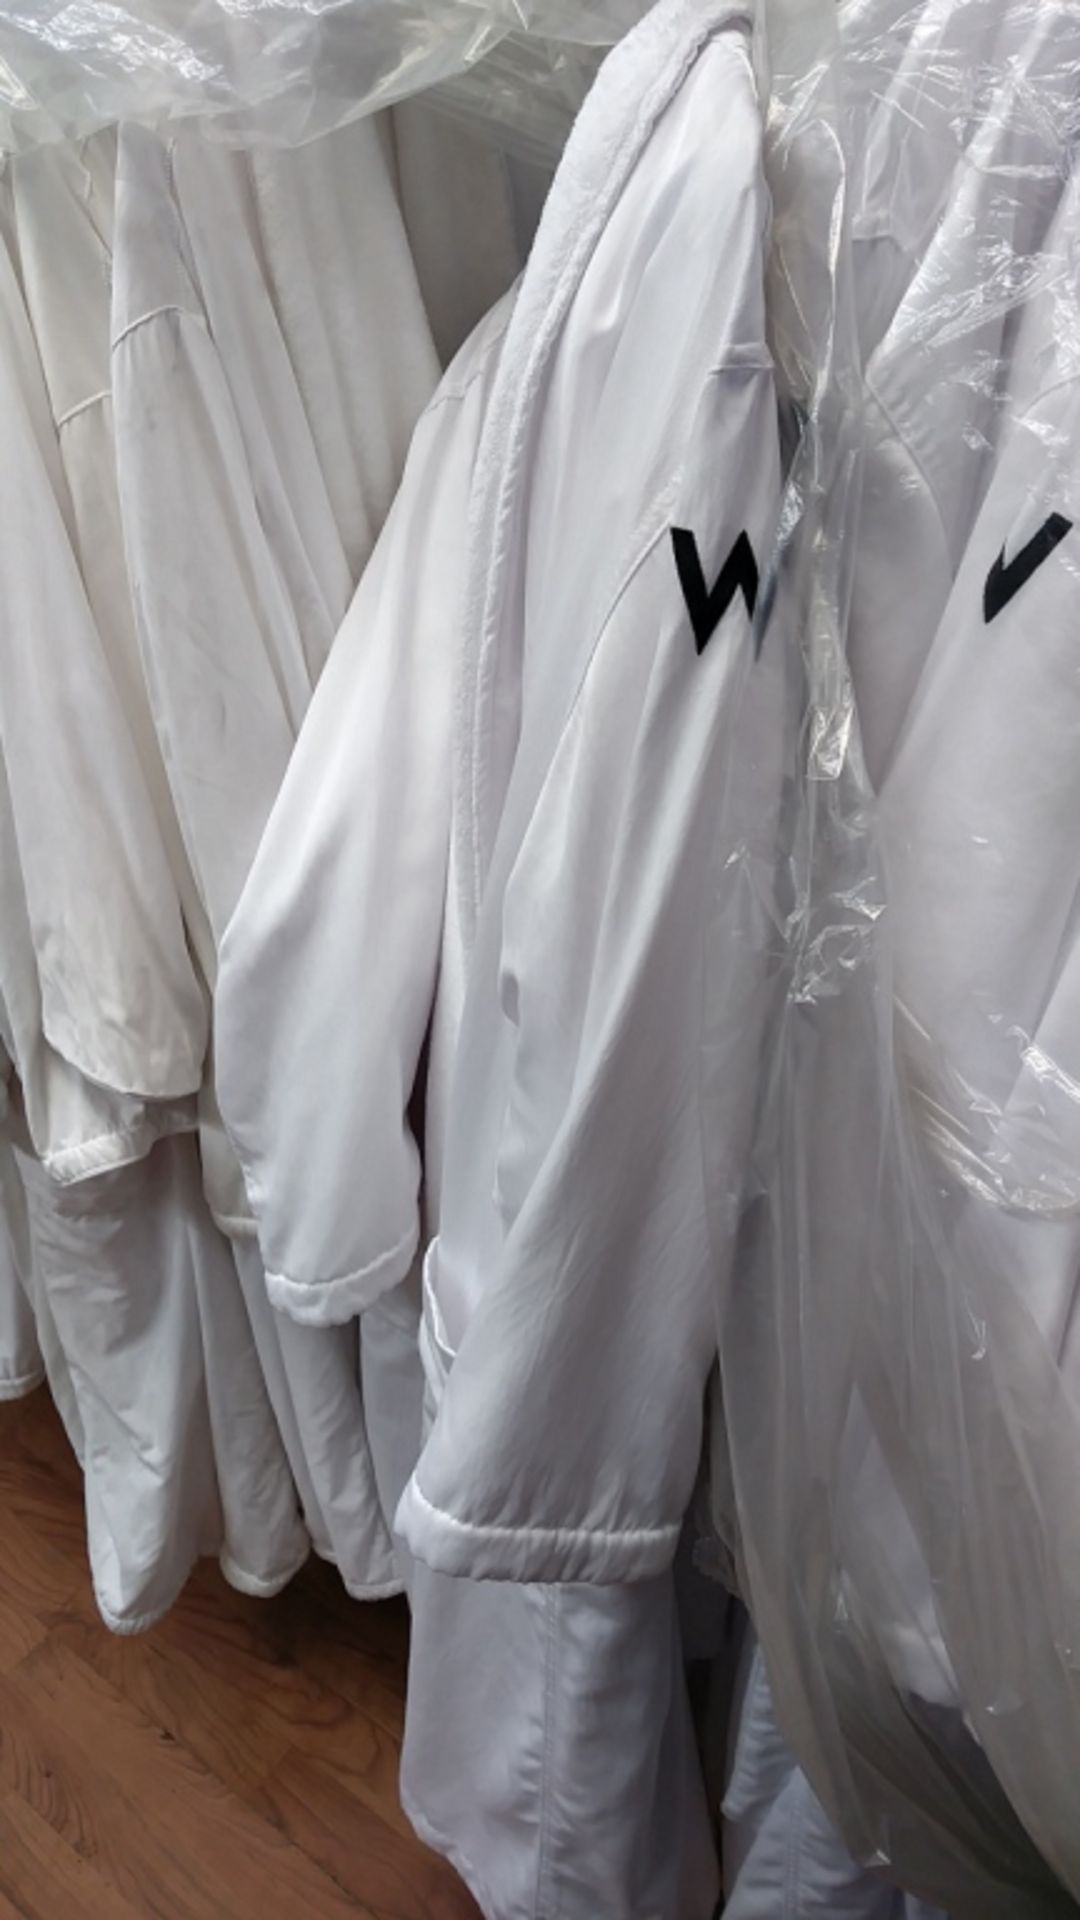 Used White Bath Robes - Assorted Sizes (INCLUDES 20 ROBES) - Image 2 of 5